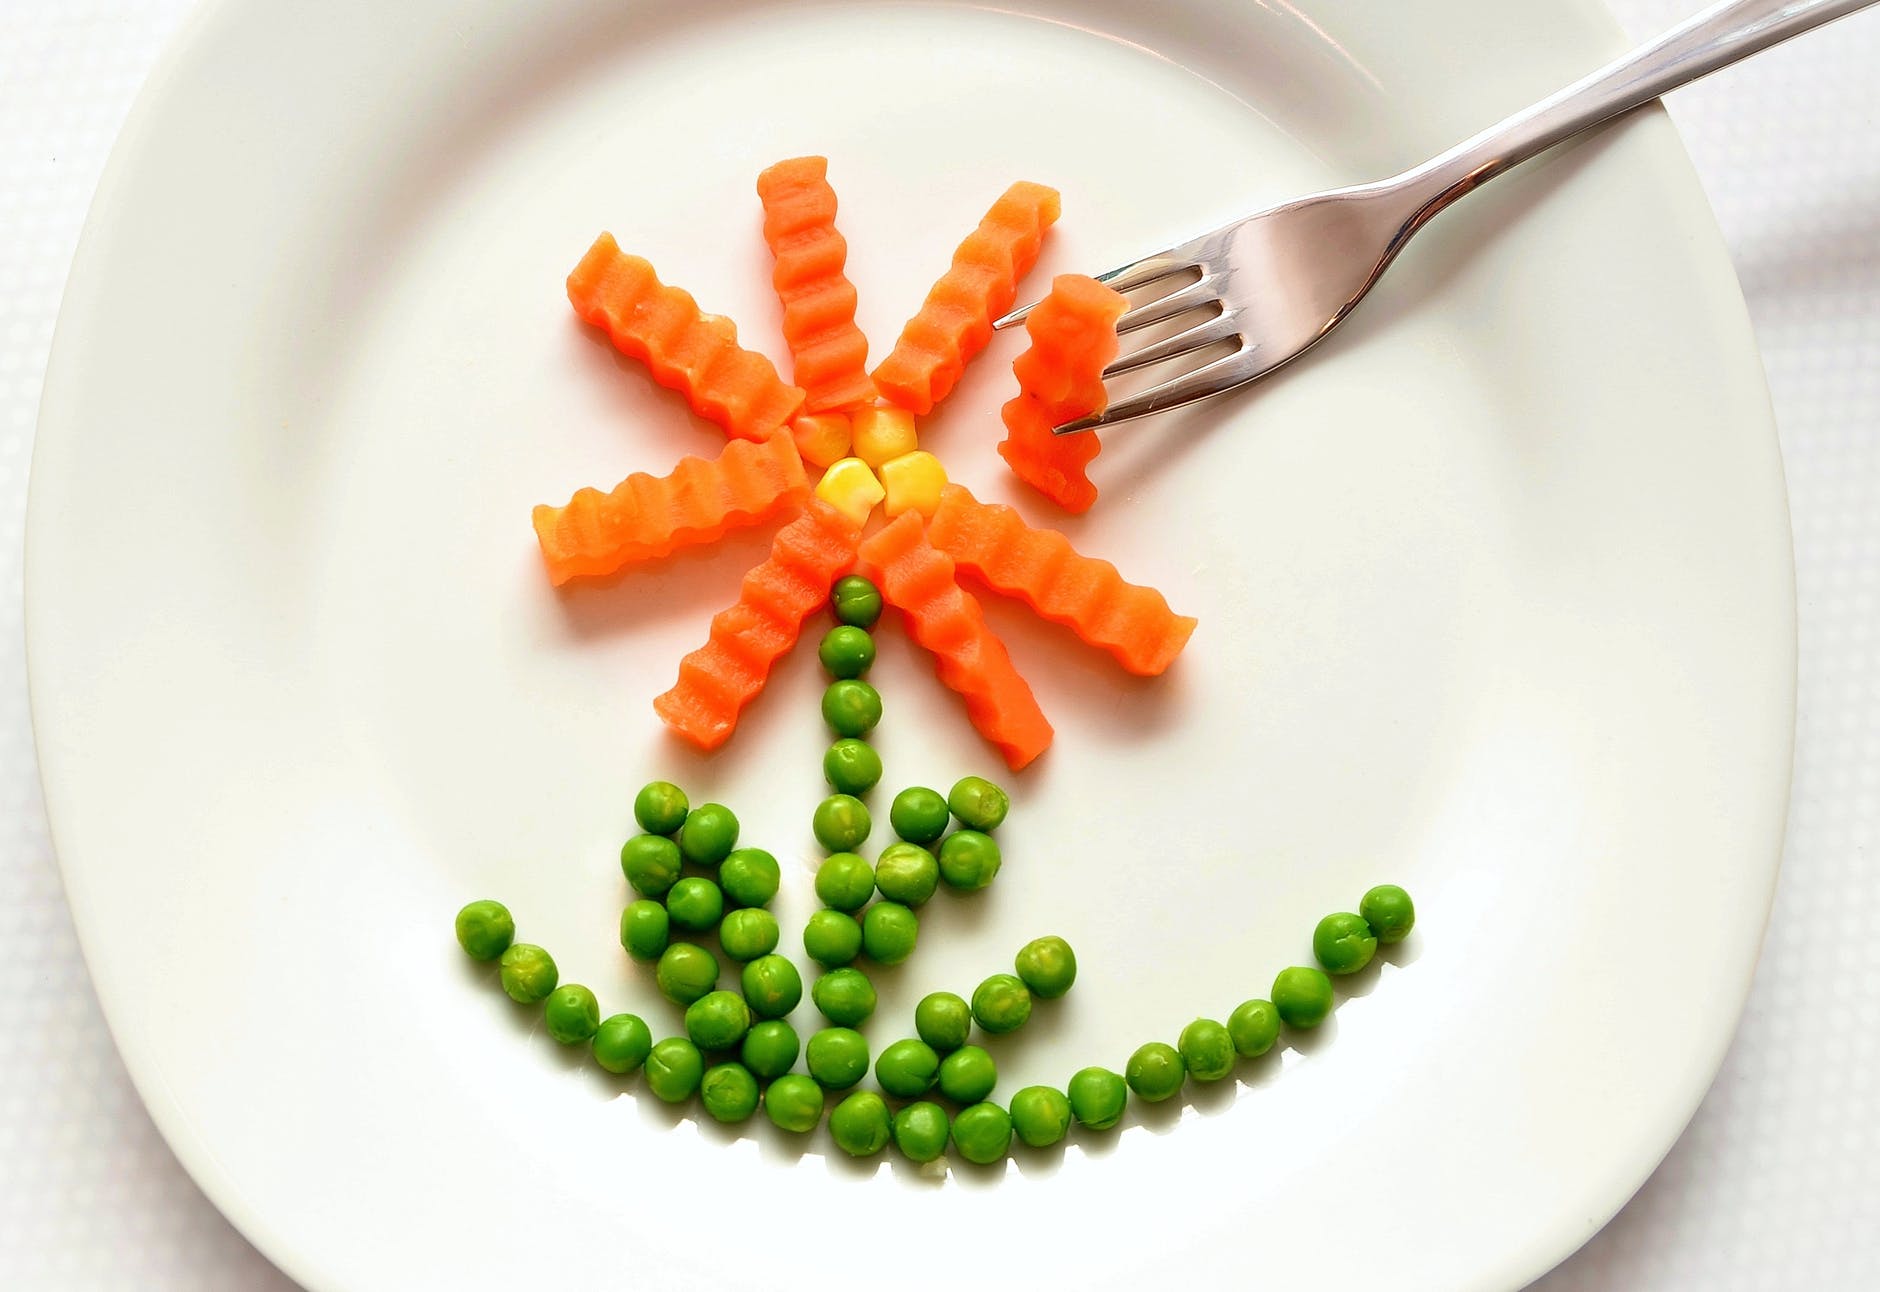 eat carrots peas healthy 45218 Natural goodness